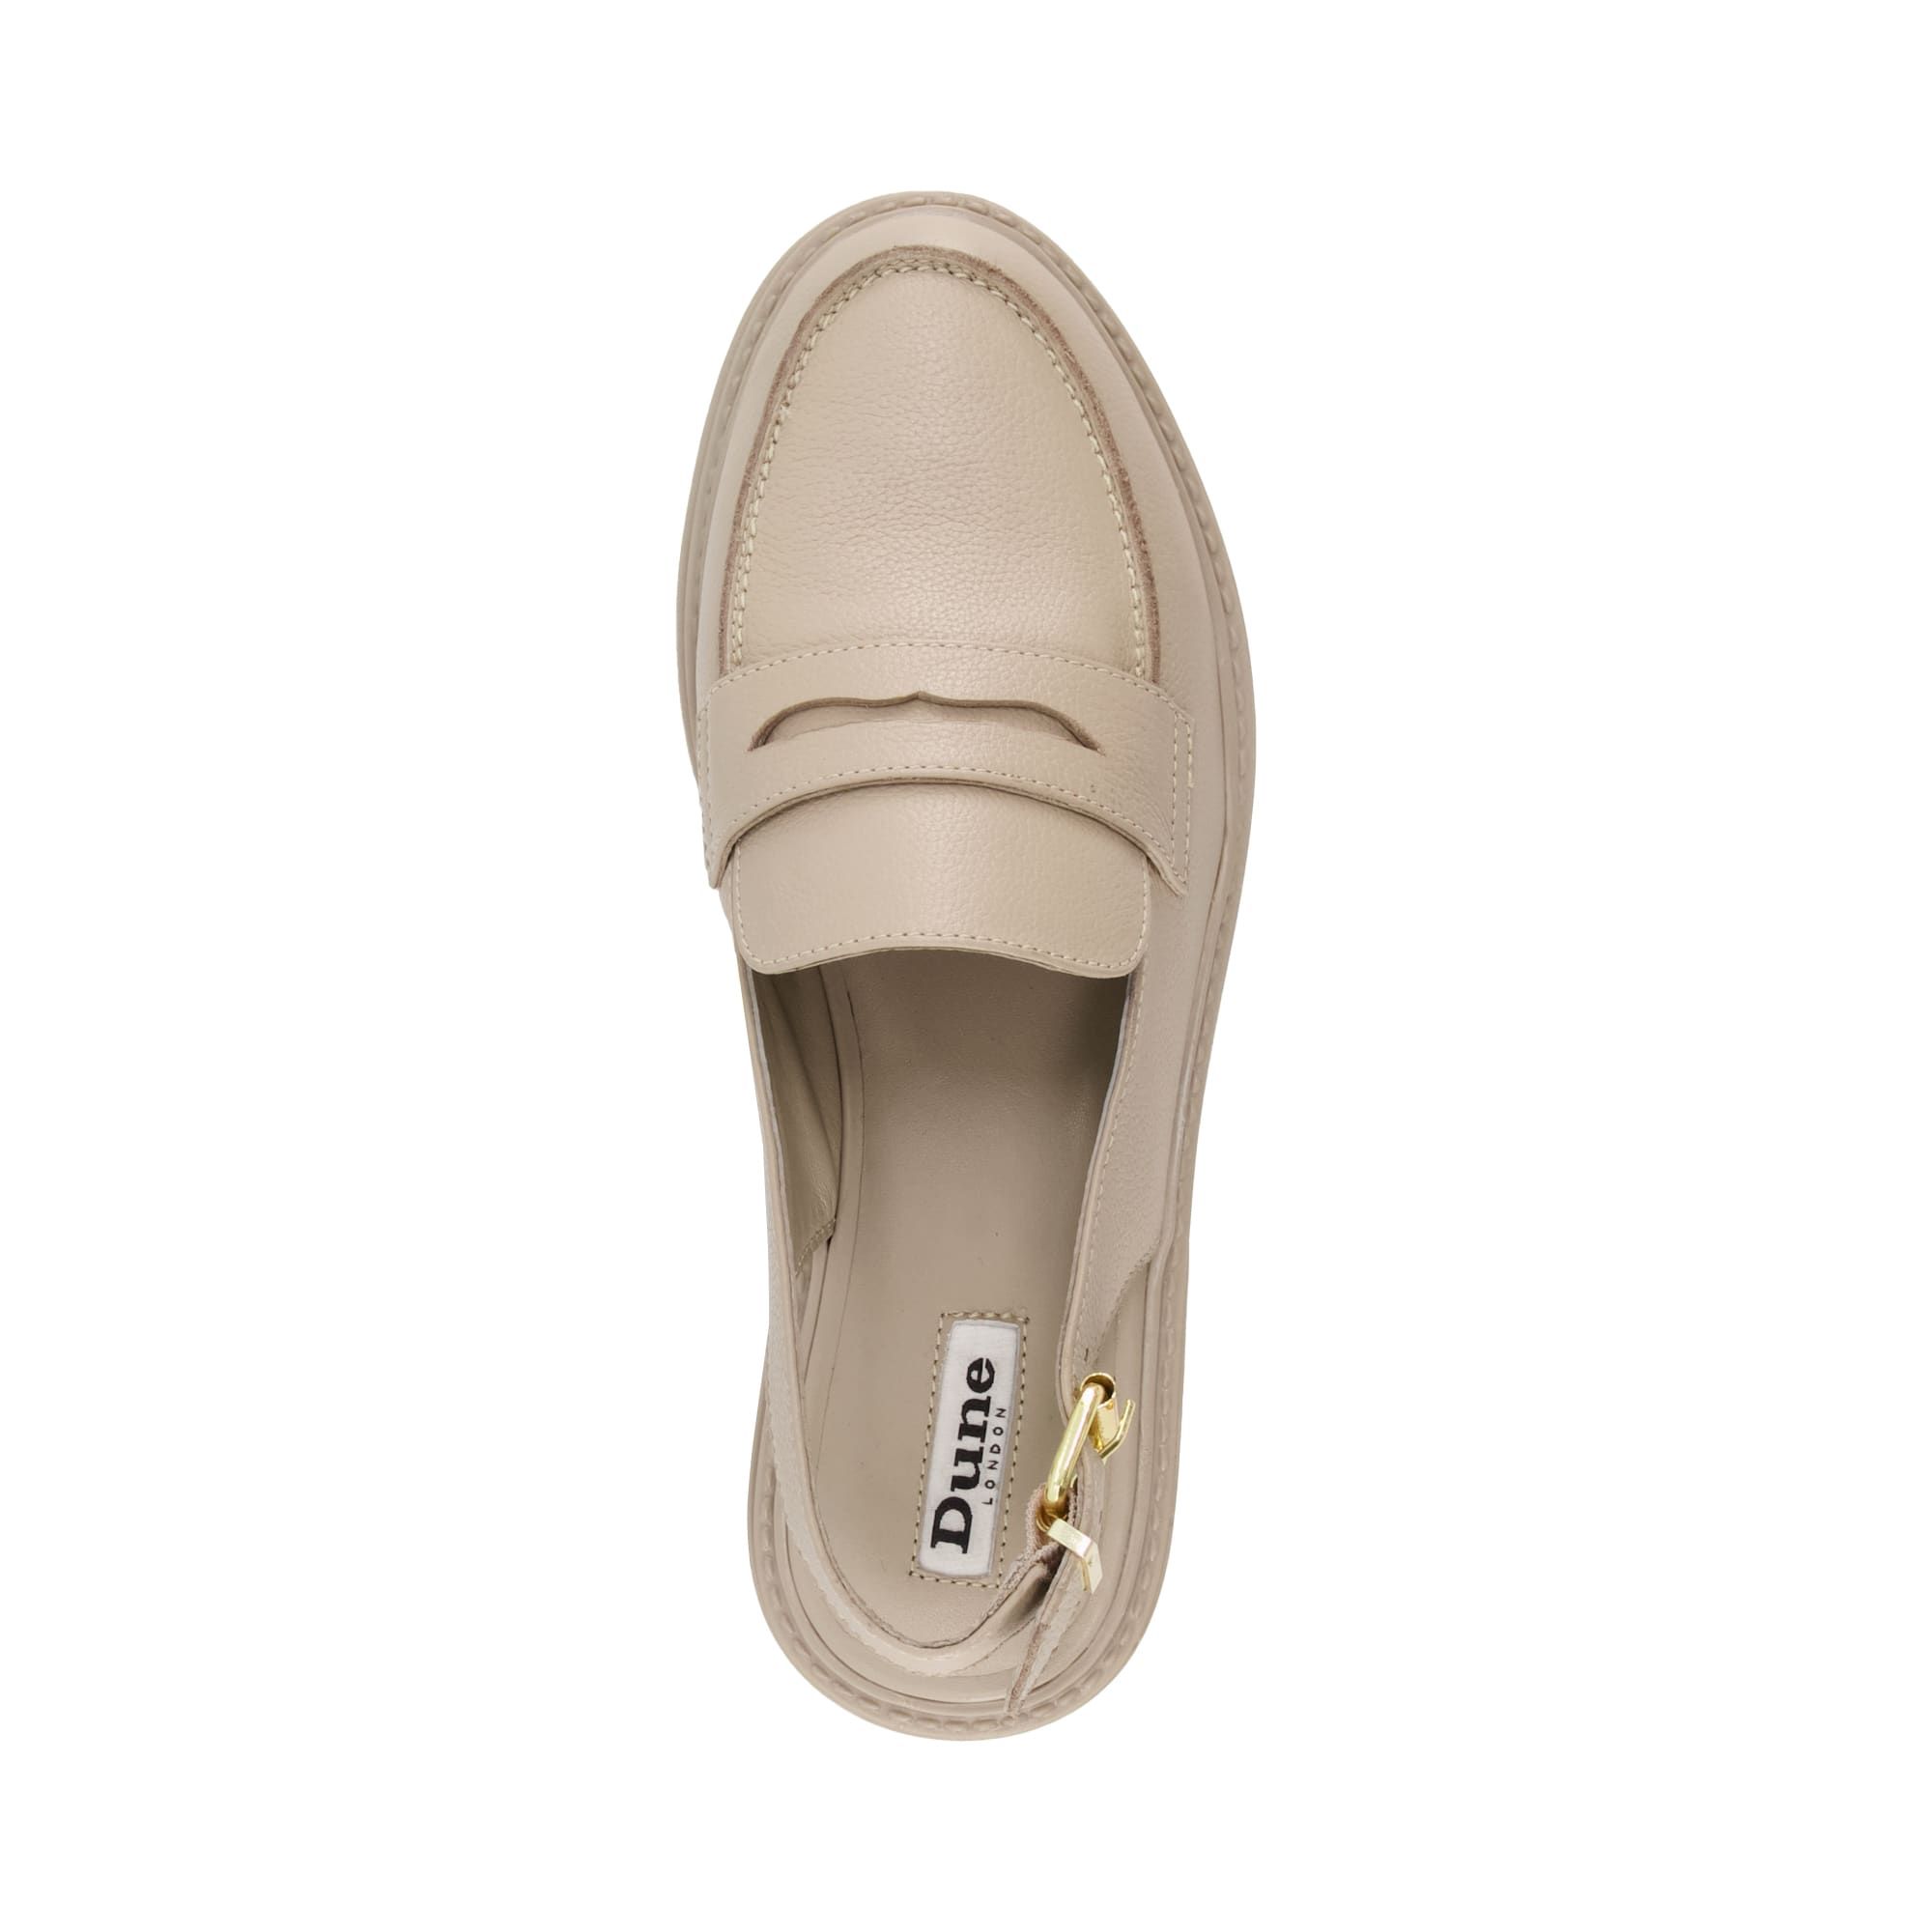 A bold twist on a smart-casual classic, our Grappa loafers rest on a chunky, cleated sole. This sling-back style features an adjustable strap and a durable leather upper.